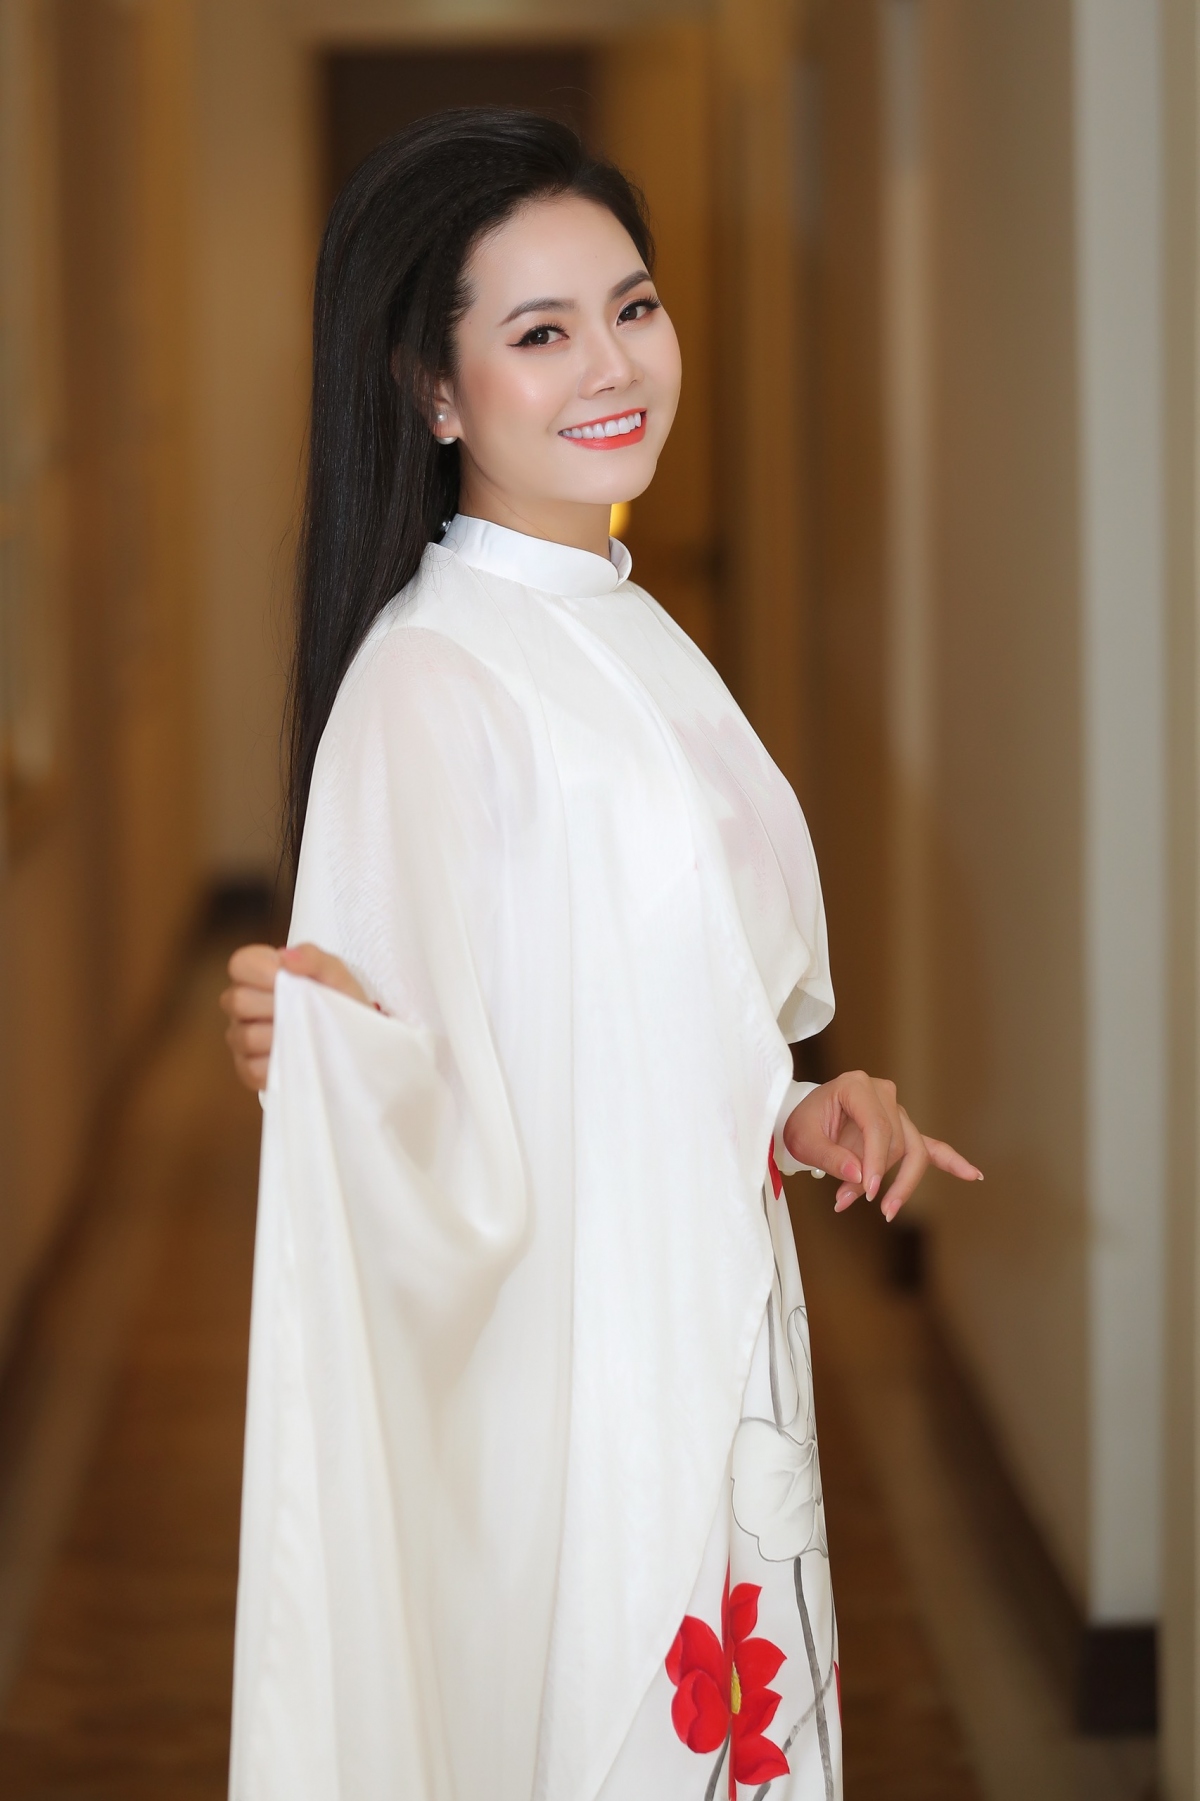 luong nguyet anh gia dinh nghe si piano Dao thu le la hinh mau ly tuong cua toi hinh anh 1